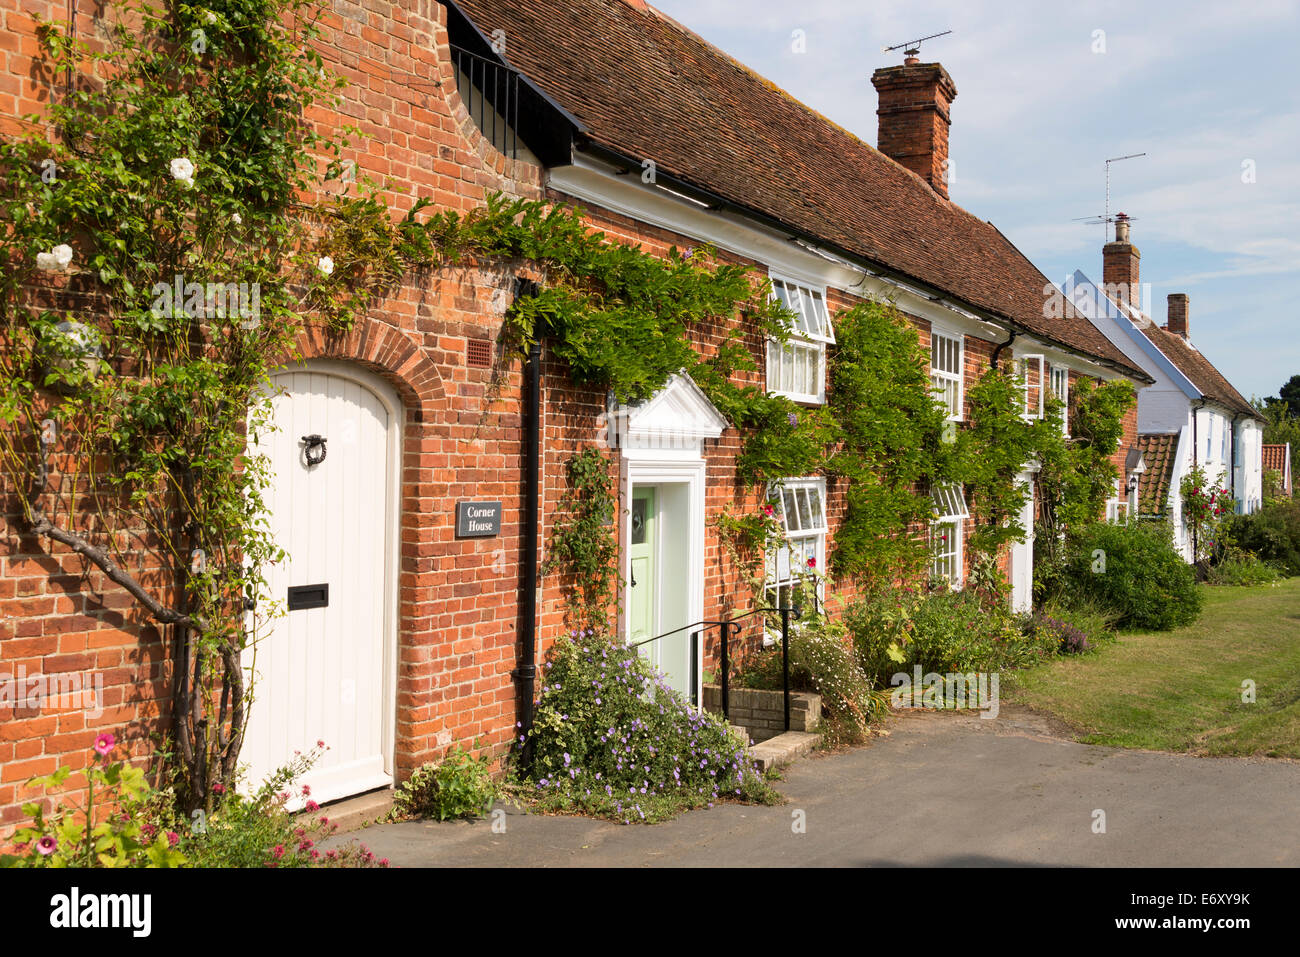 Pretty cottages in the village, Orford, Suffolk, England, UK. Stock Photo